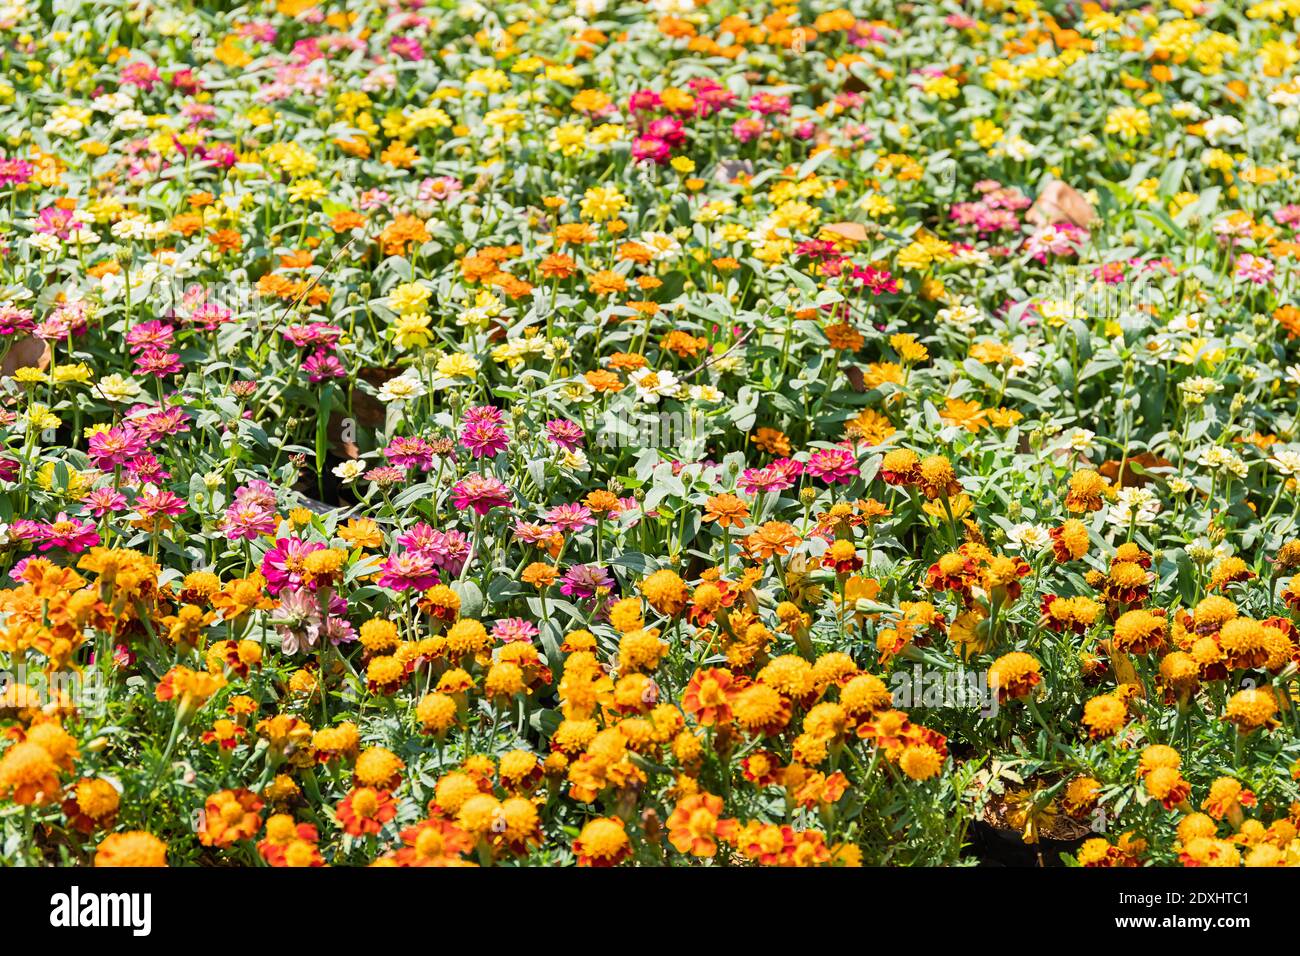 Colorful Zinnia Flower Field Blooming In The Garden Stock Photo